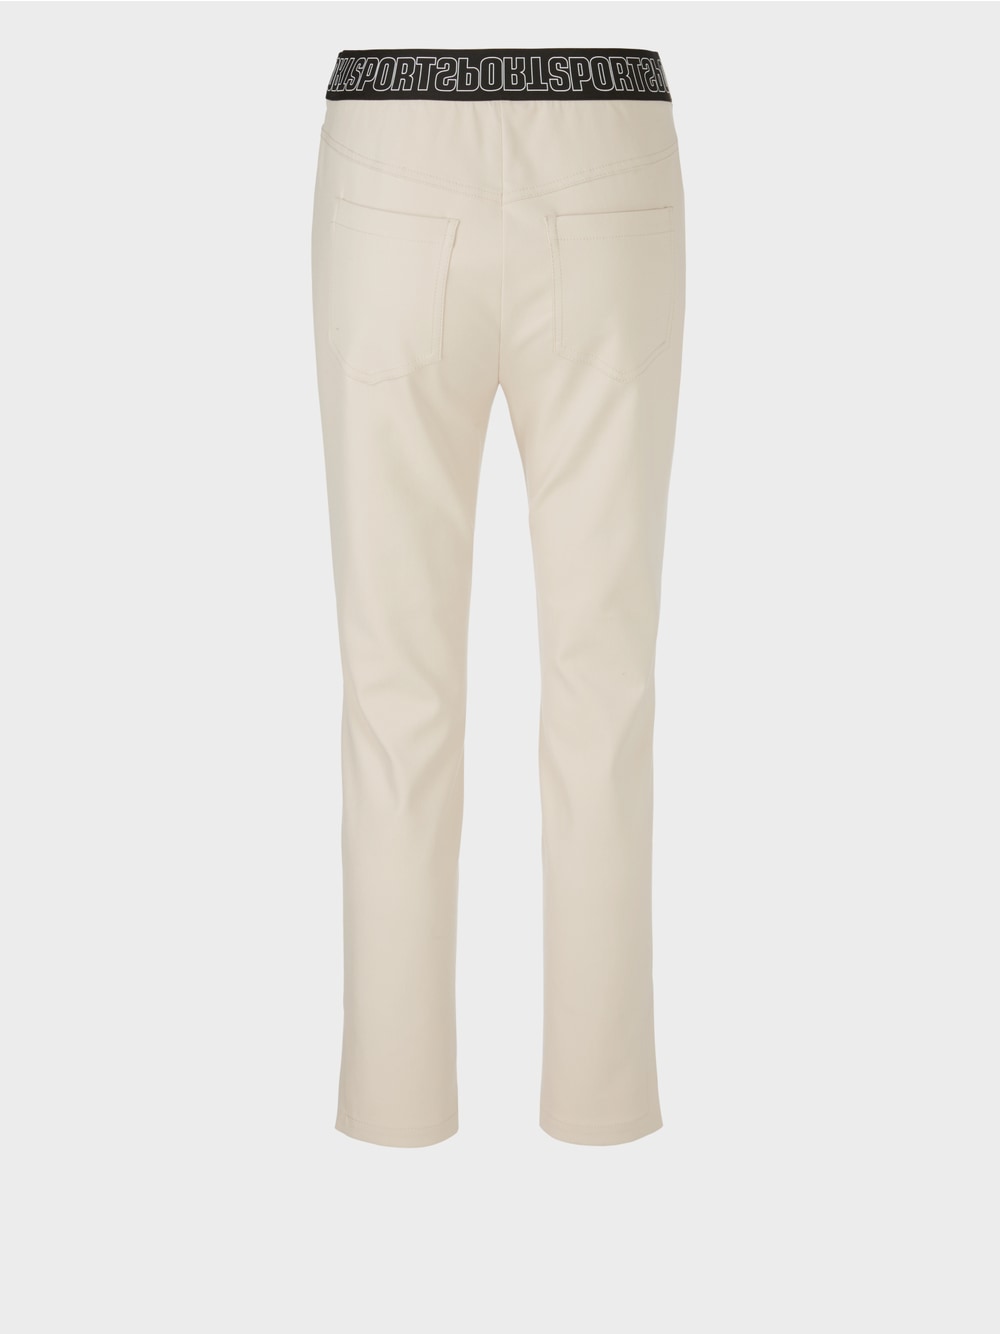 Slim high waisted trousers